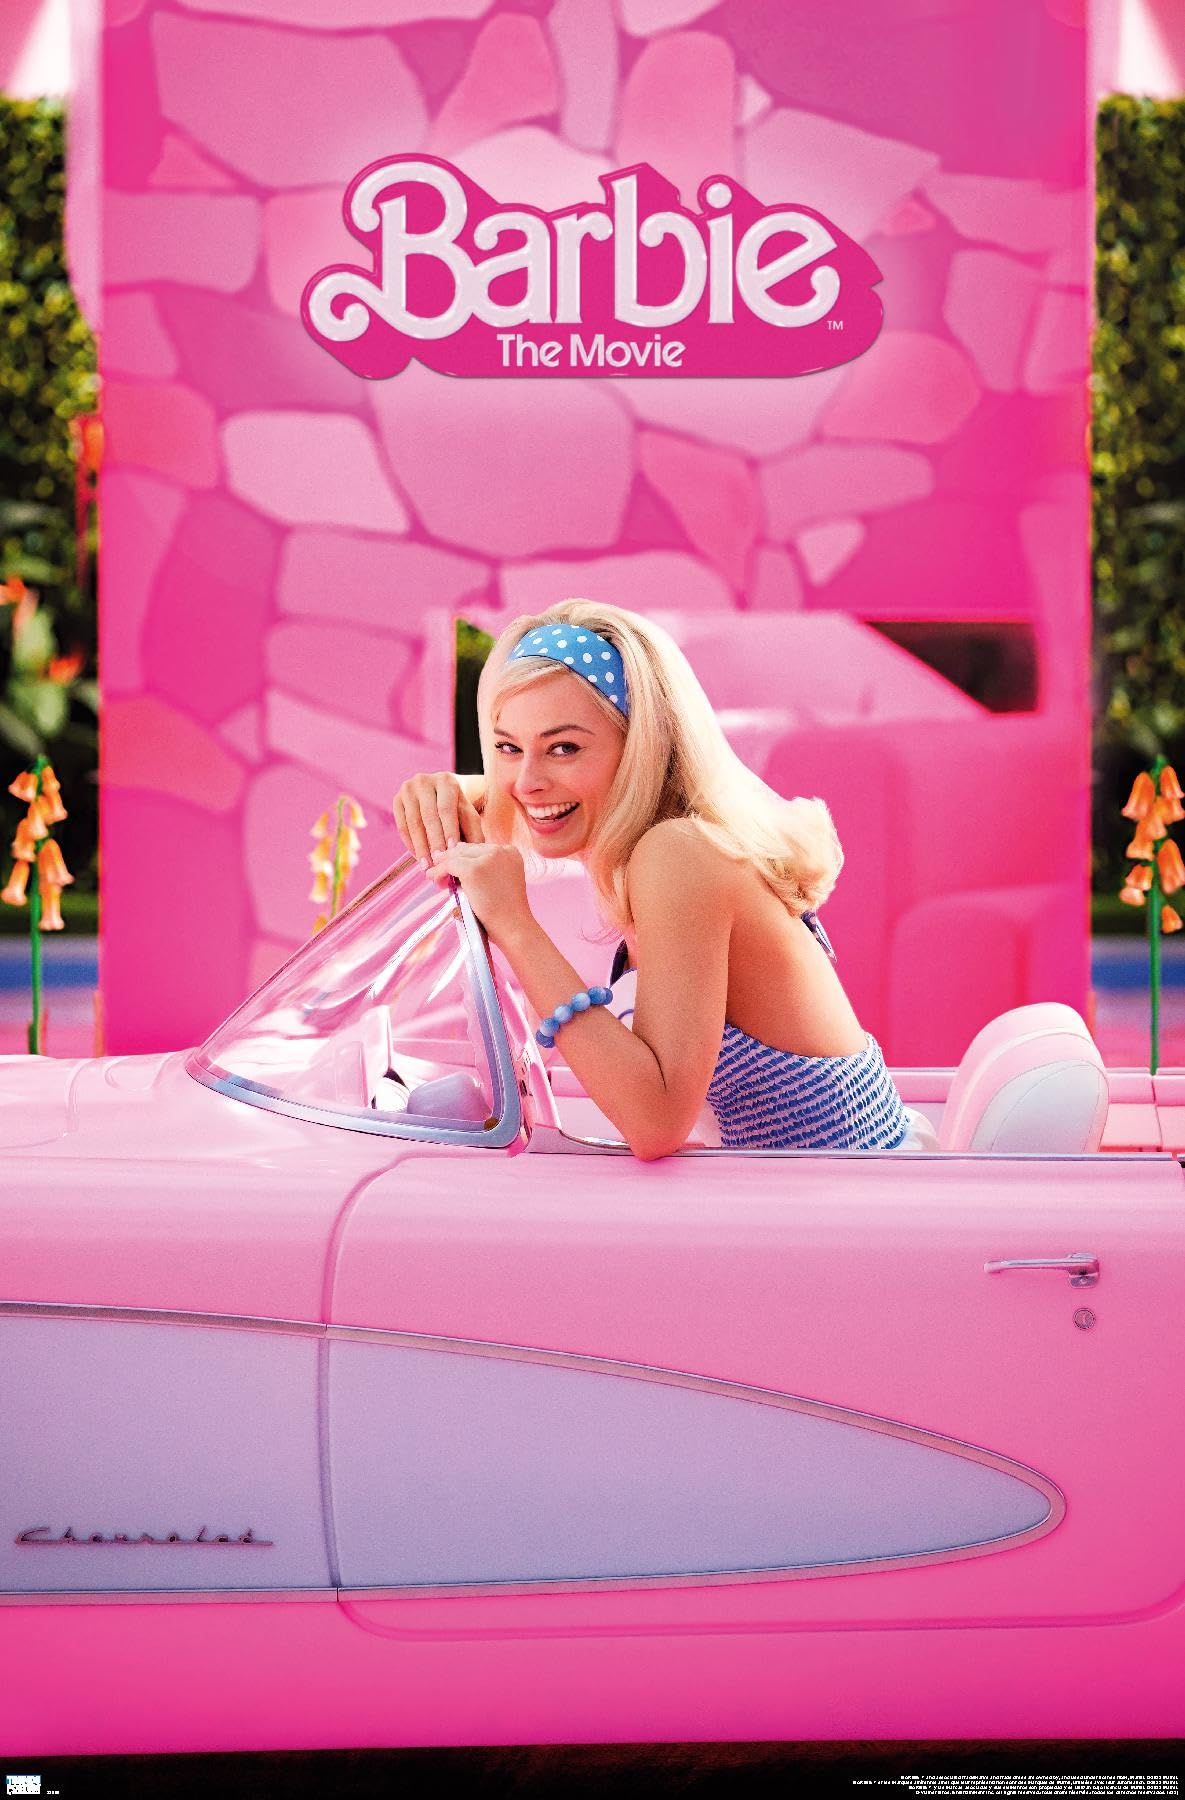 Barbie movie poster featuring Barbie in her car in front of a pink background